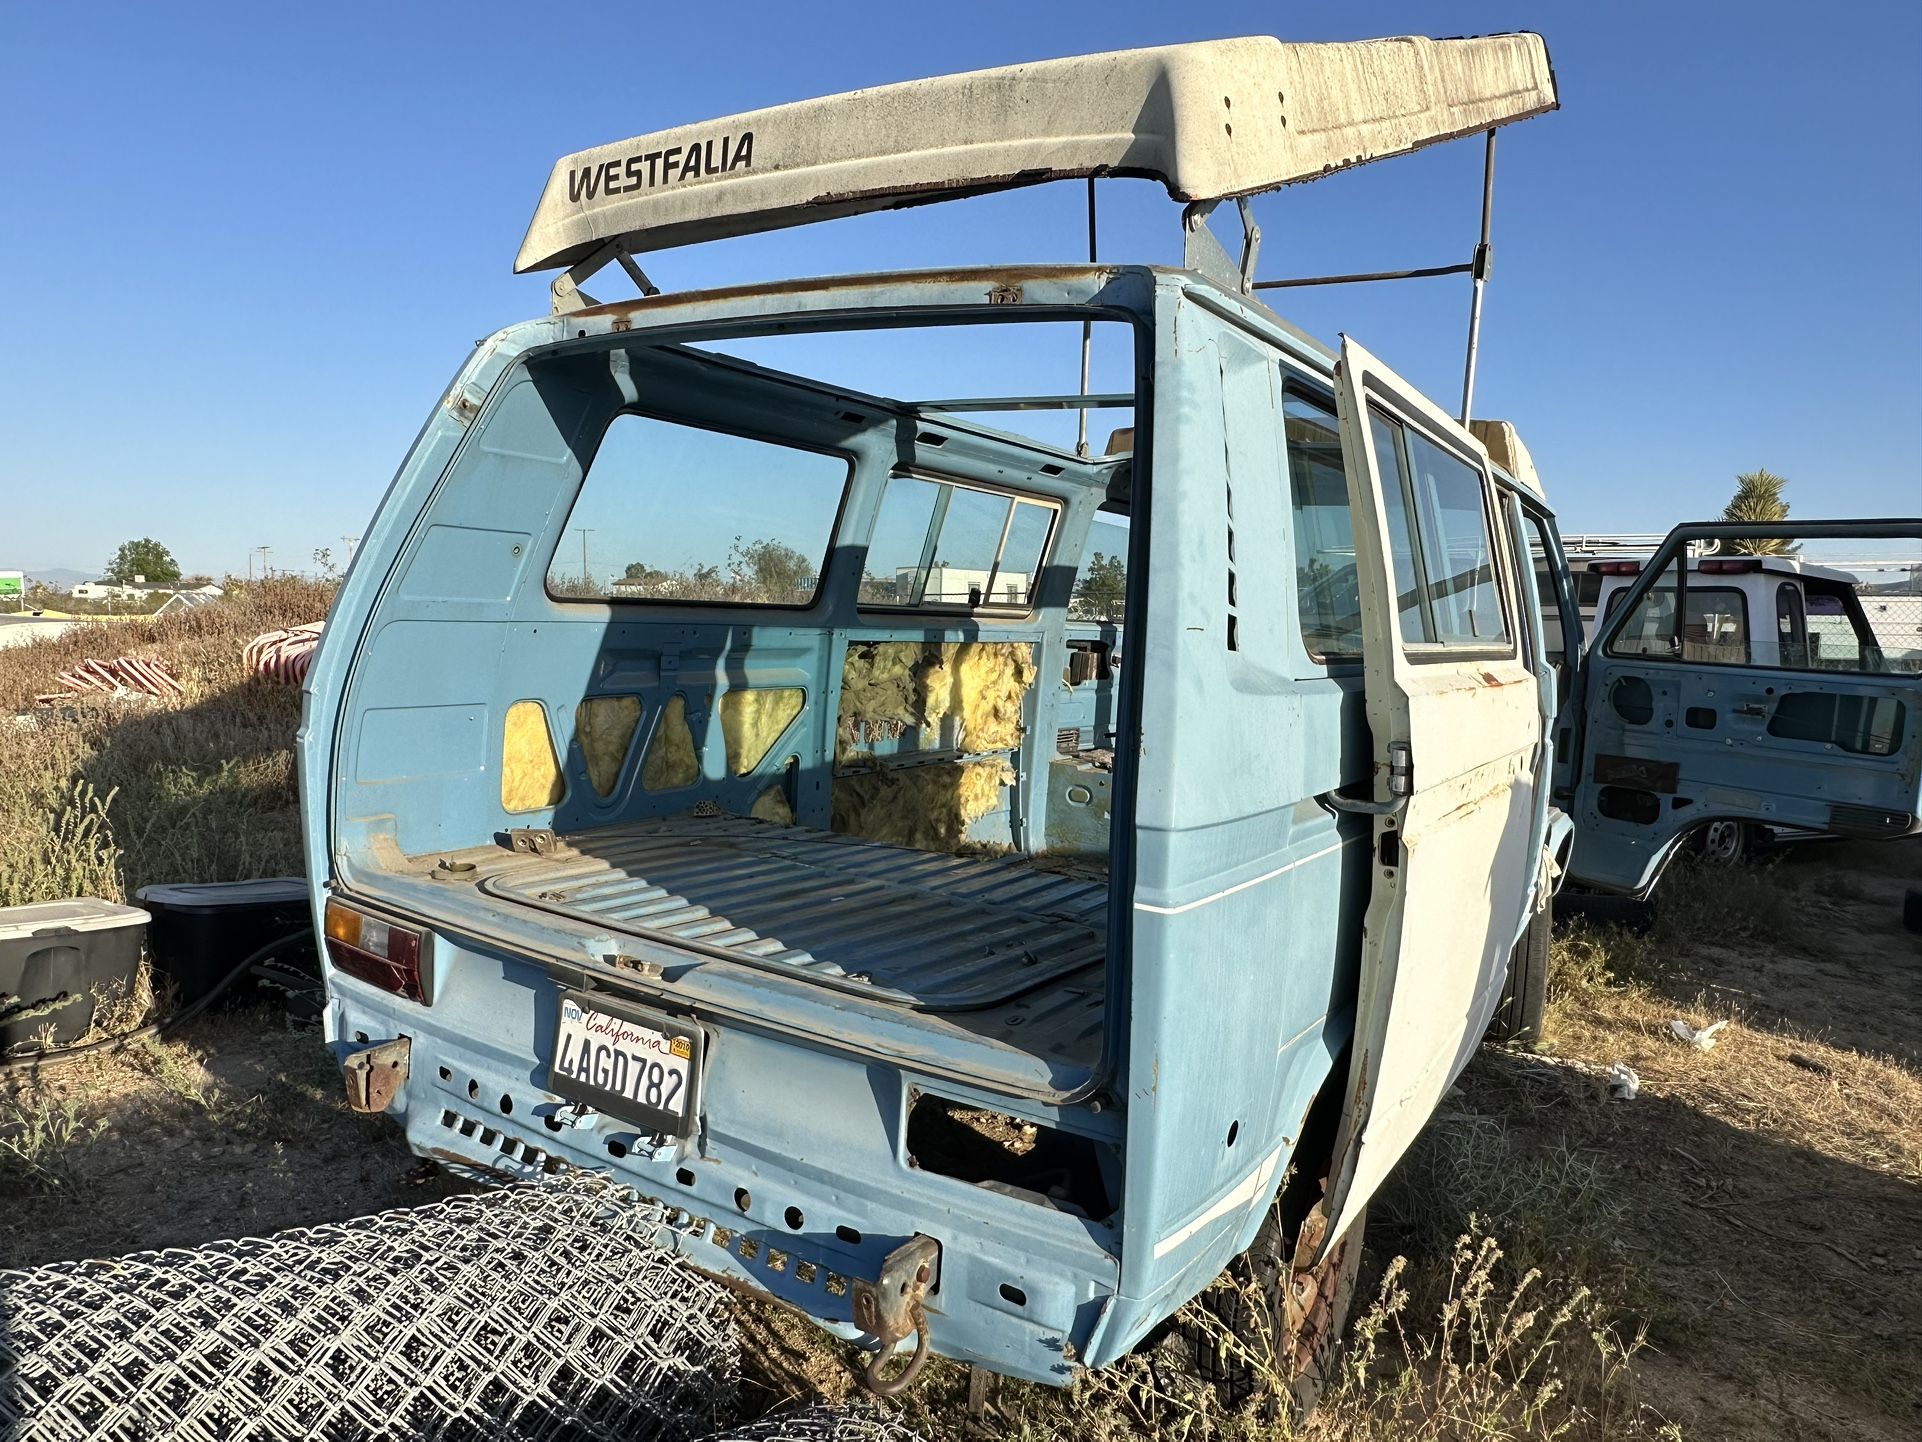 Parts Only!  80 VW VANAGON ! No ENGINE OR TRANS or INTERIOR JUST BODY PARTS ONLY!